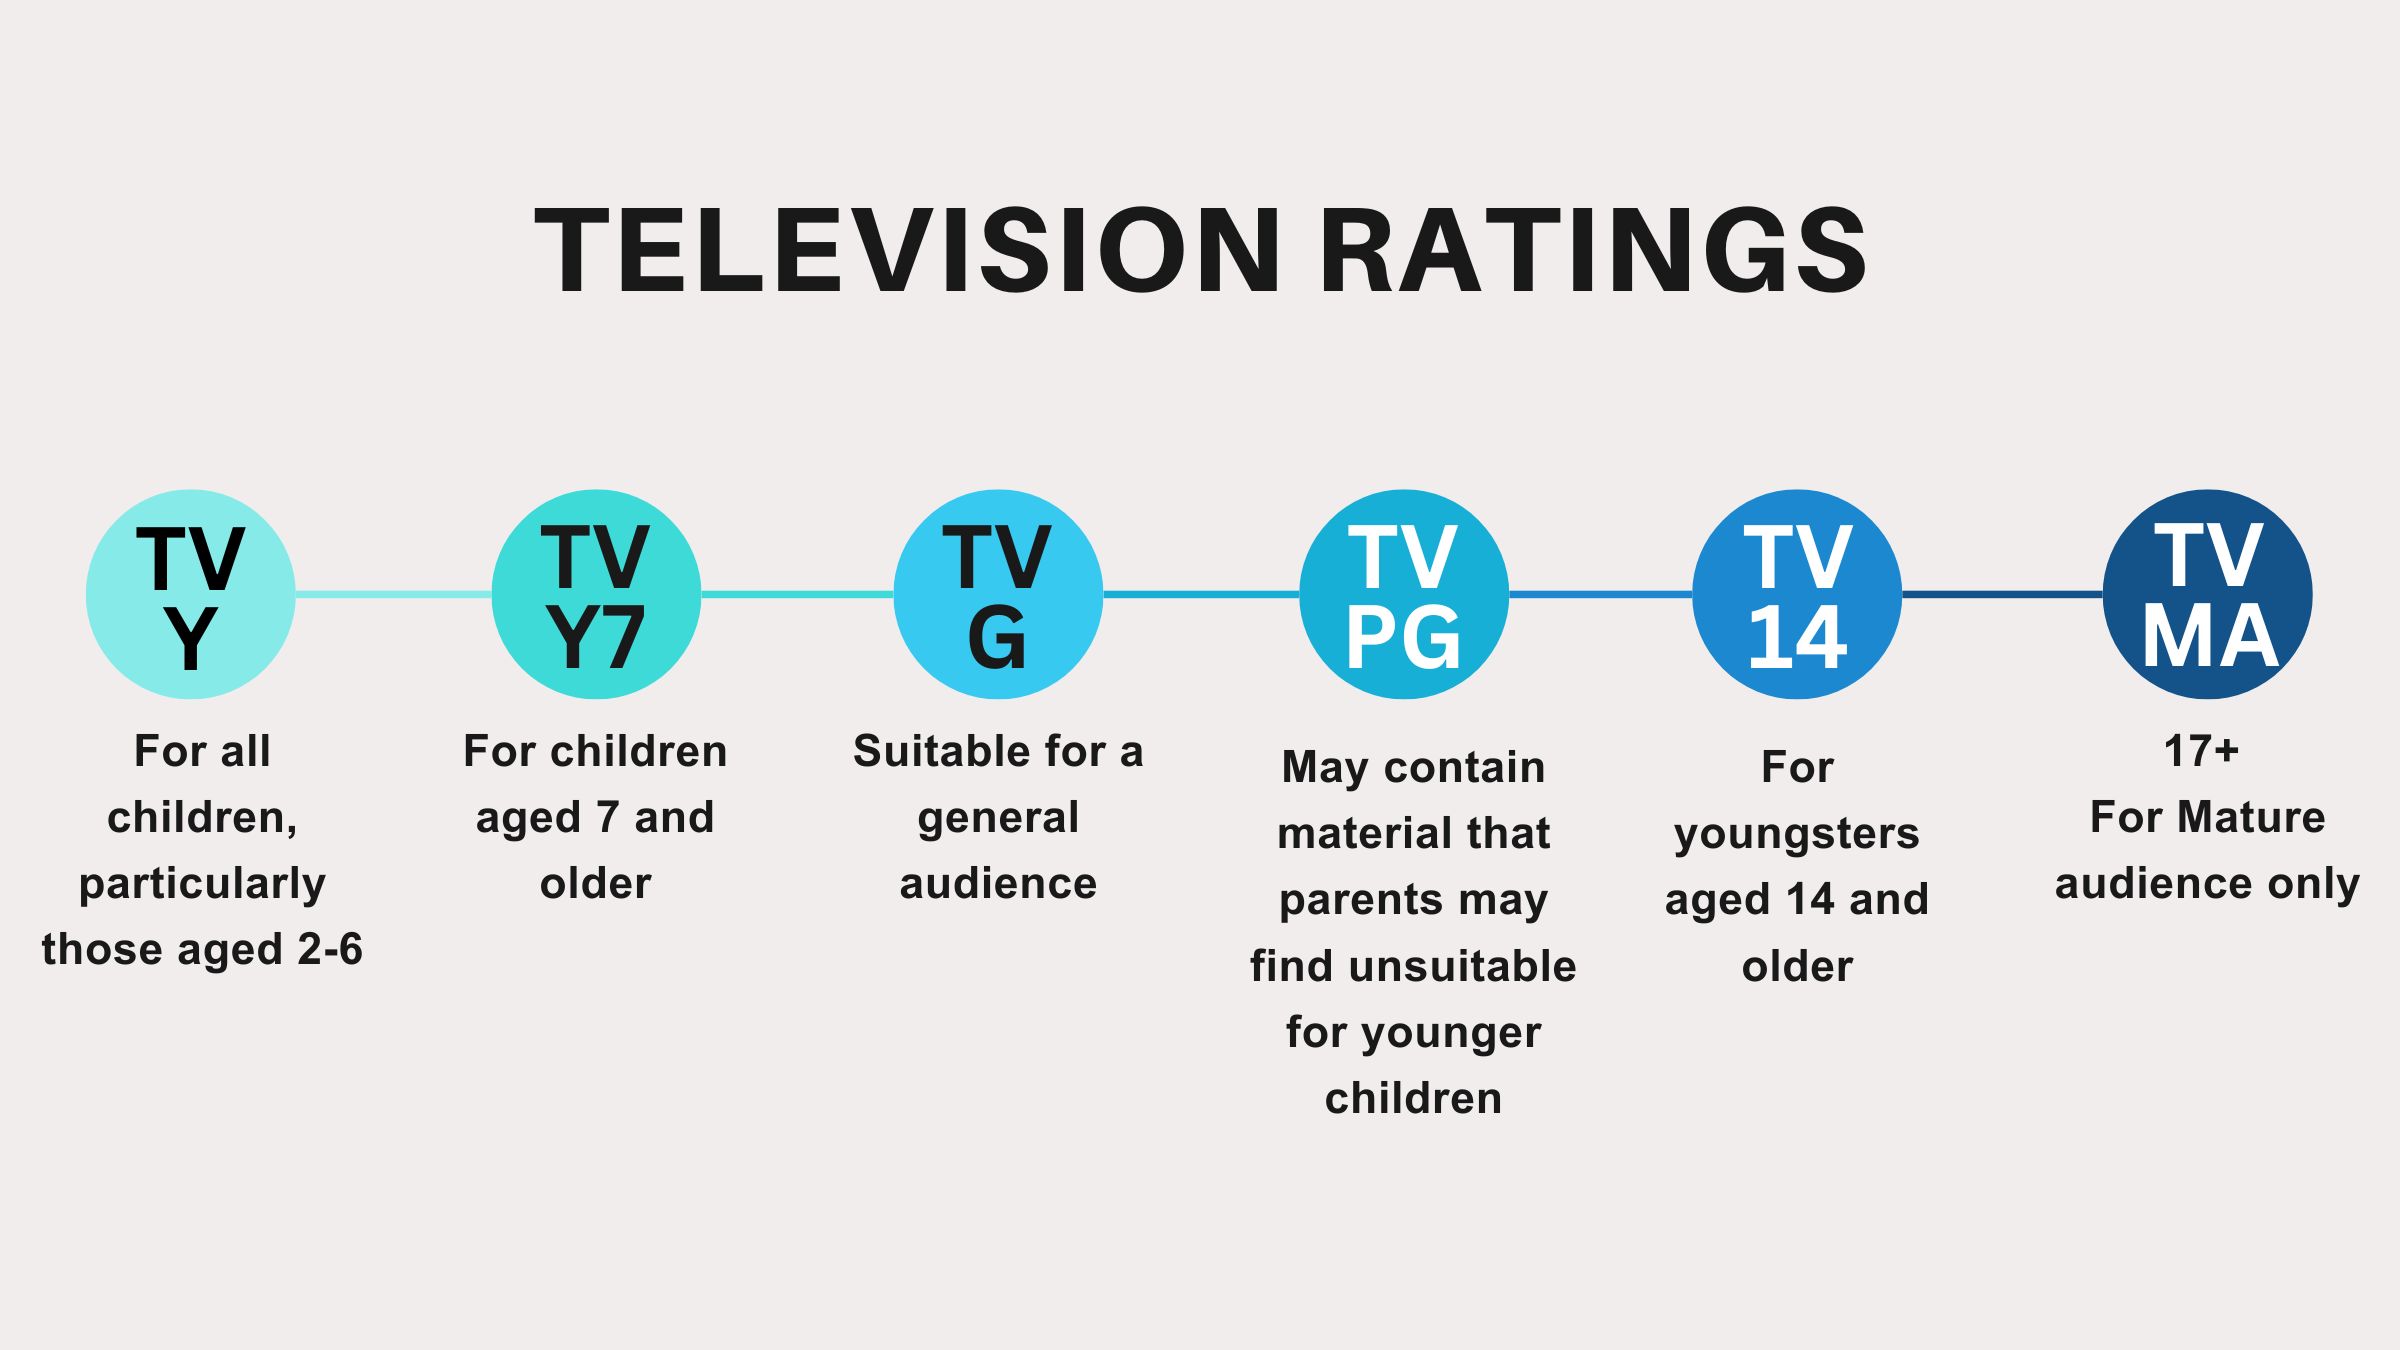 Maturity ratings for TV